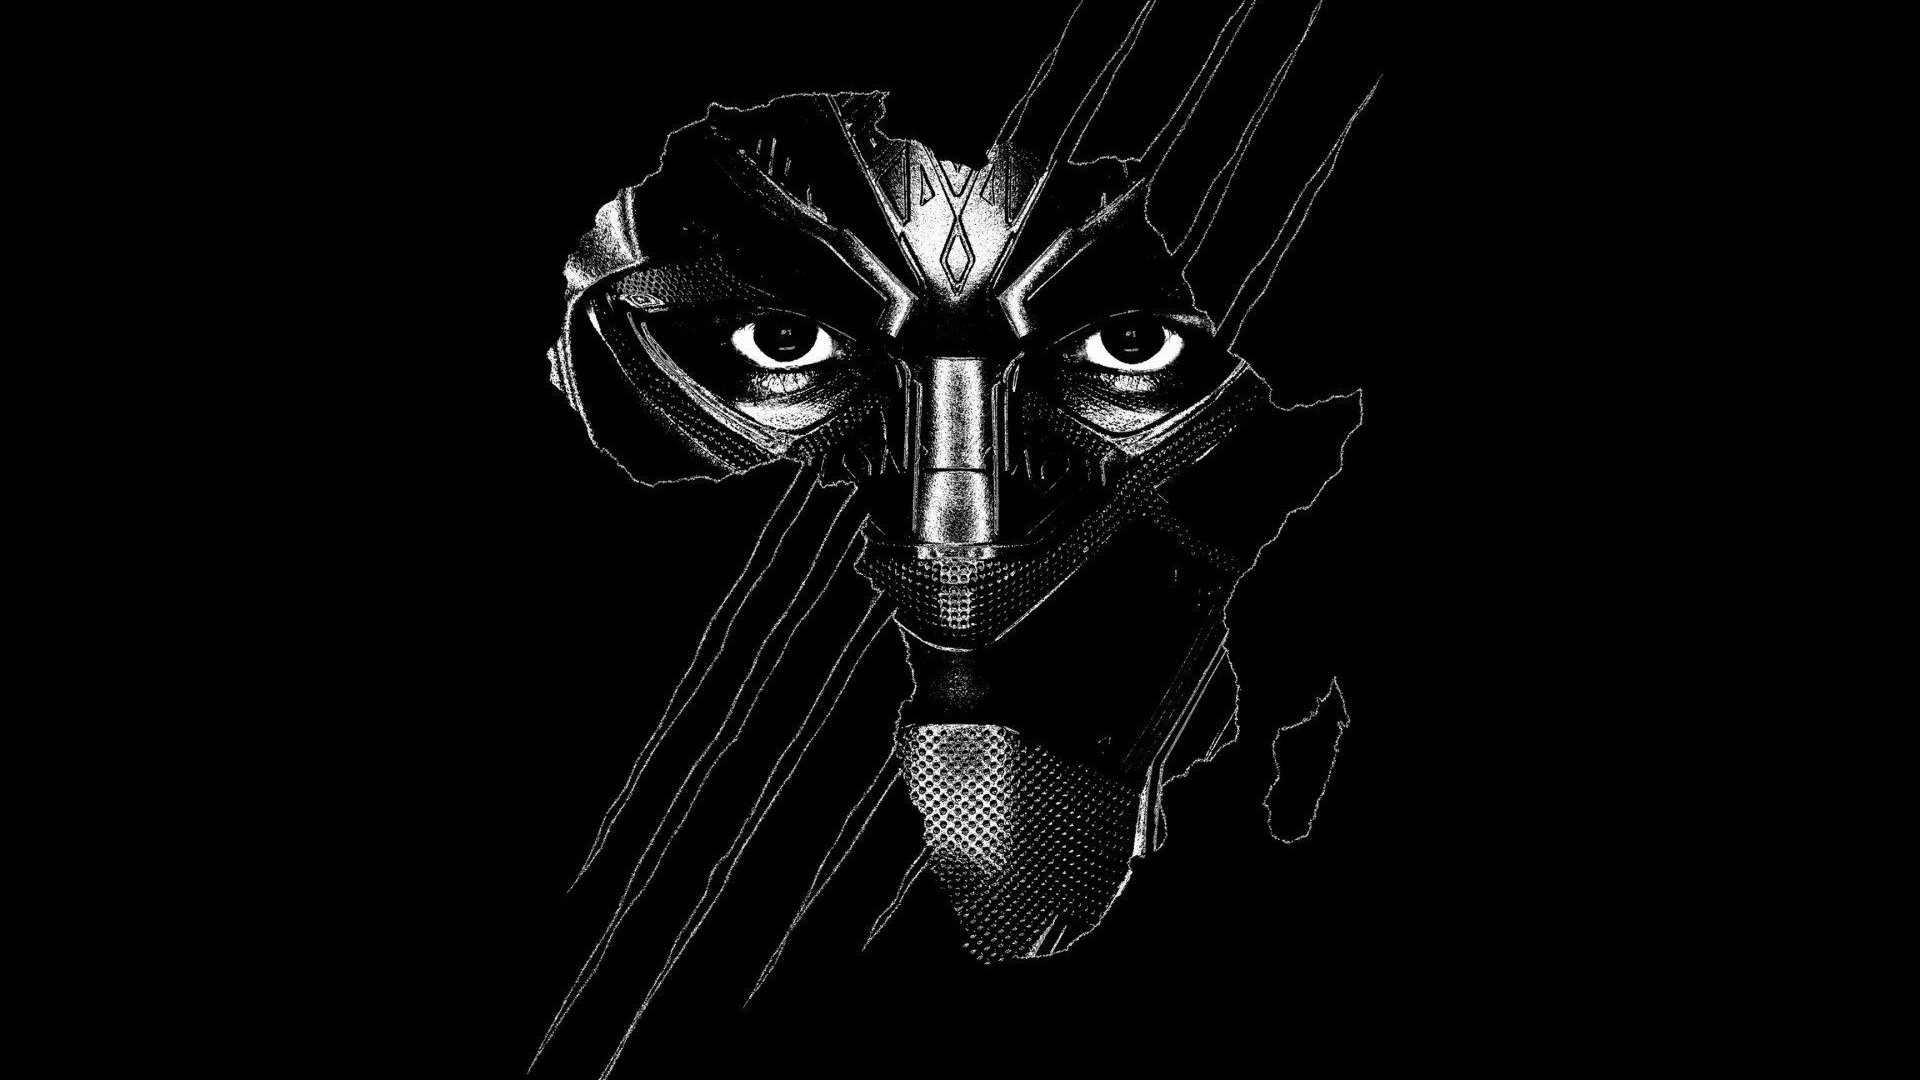 Full Movie Black Panther Wallpaper with high-resolution 1920x1080 pixel. You can use this poster wallpaper for your Desktop Computers, Mac Screensavers, Windows Backgrounds, iPhone Wallpapers, Tablet or Android Lock screen and another Mobile device